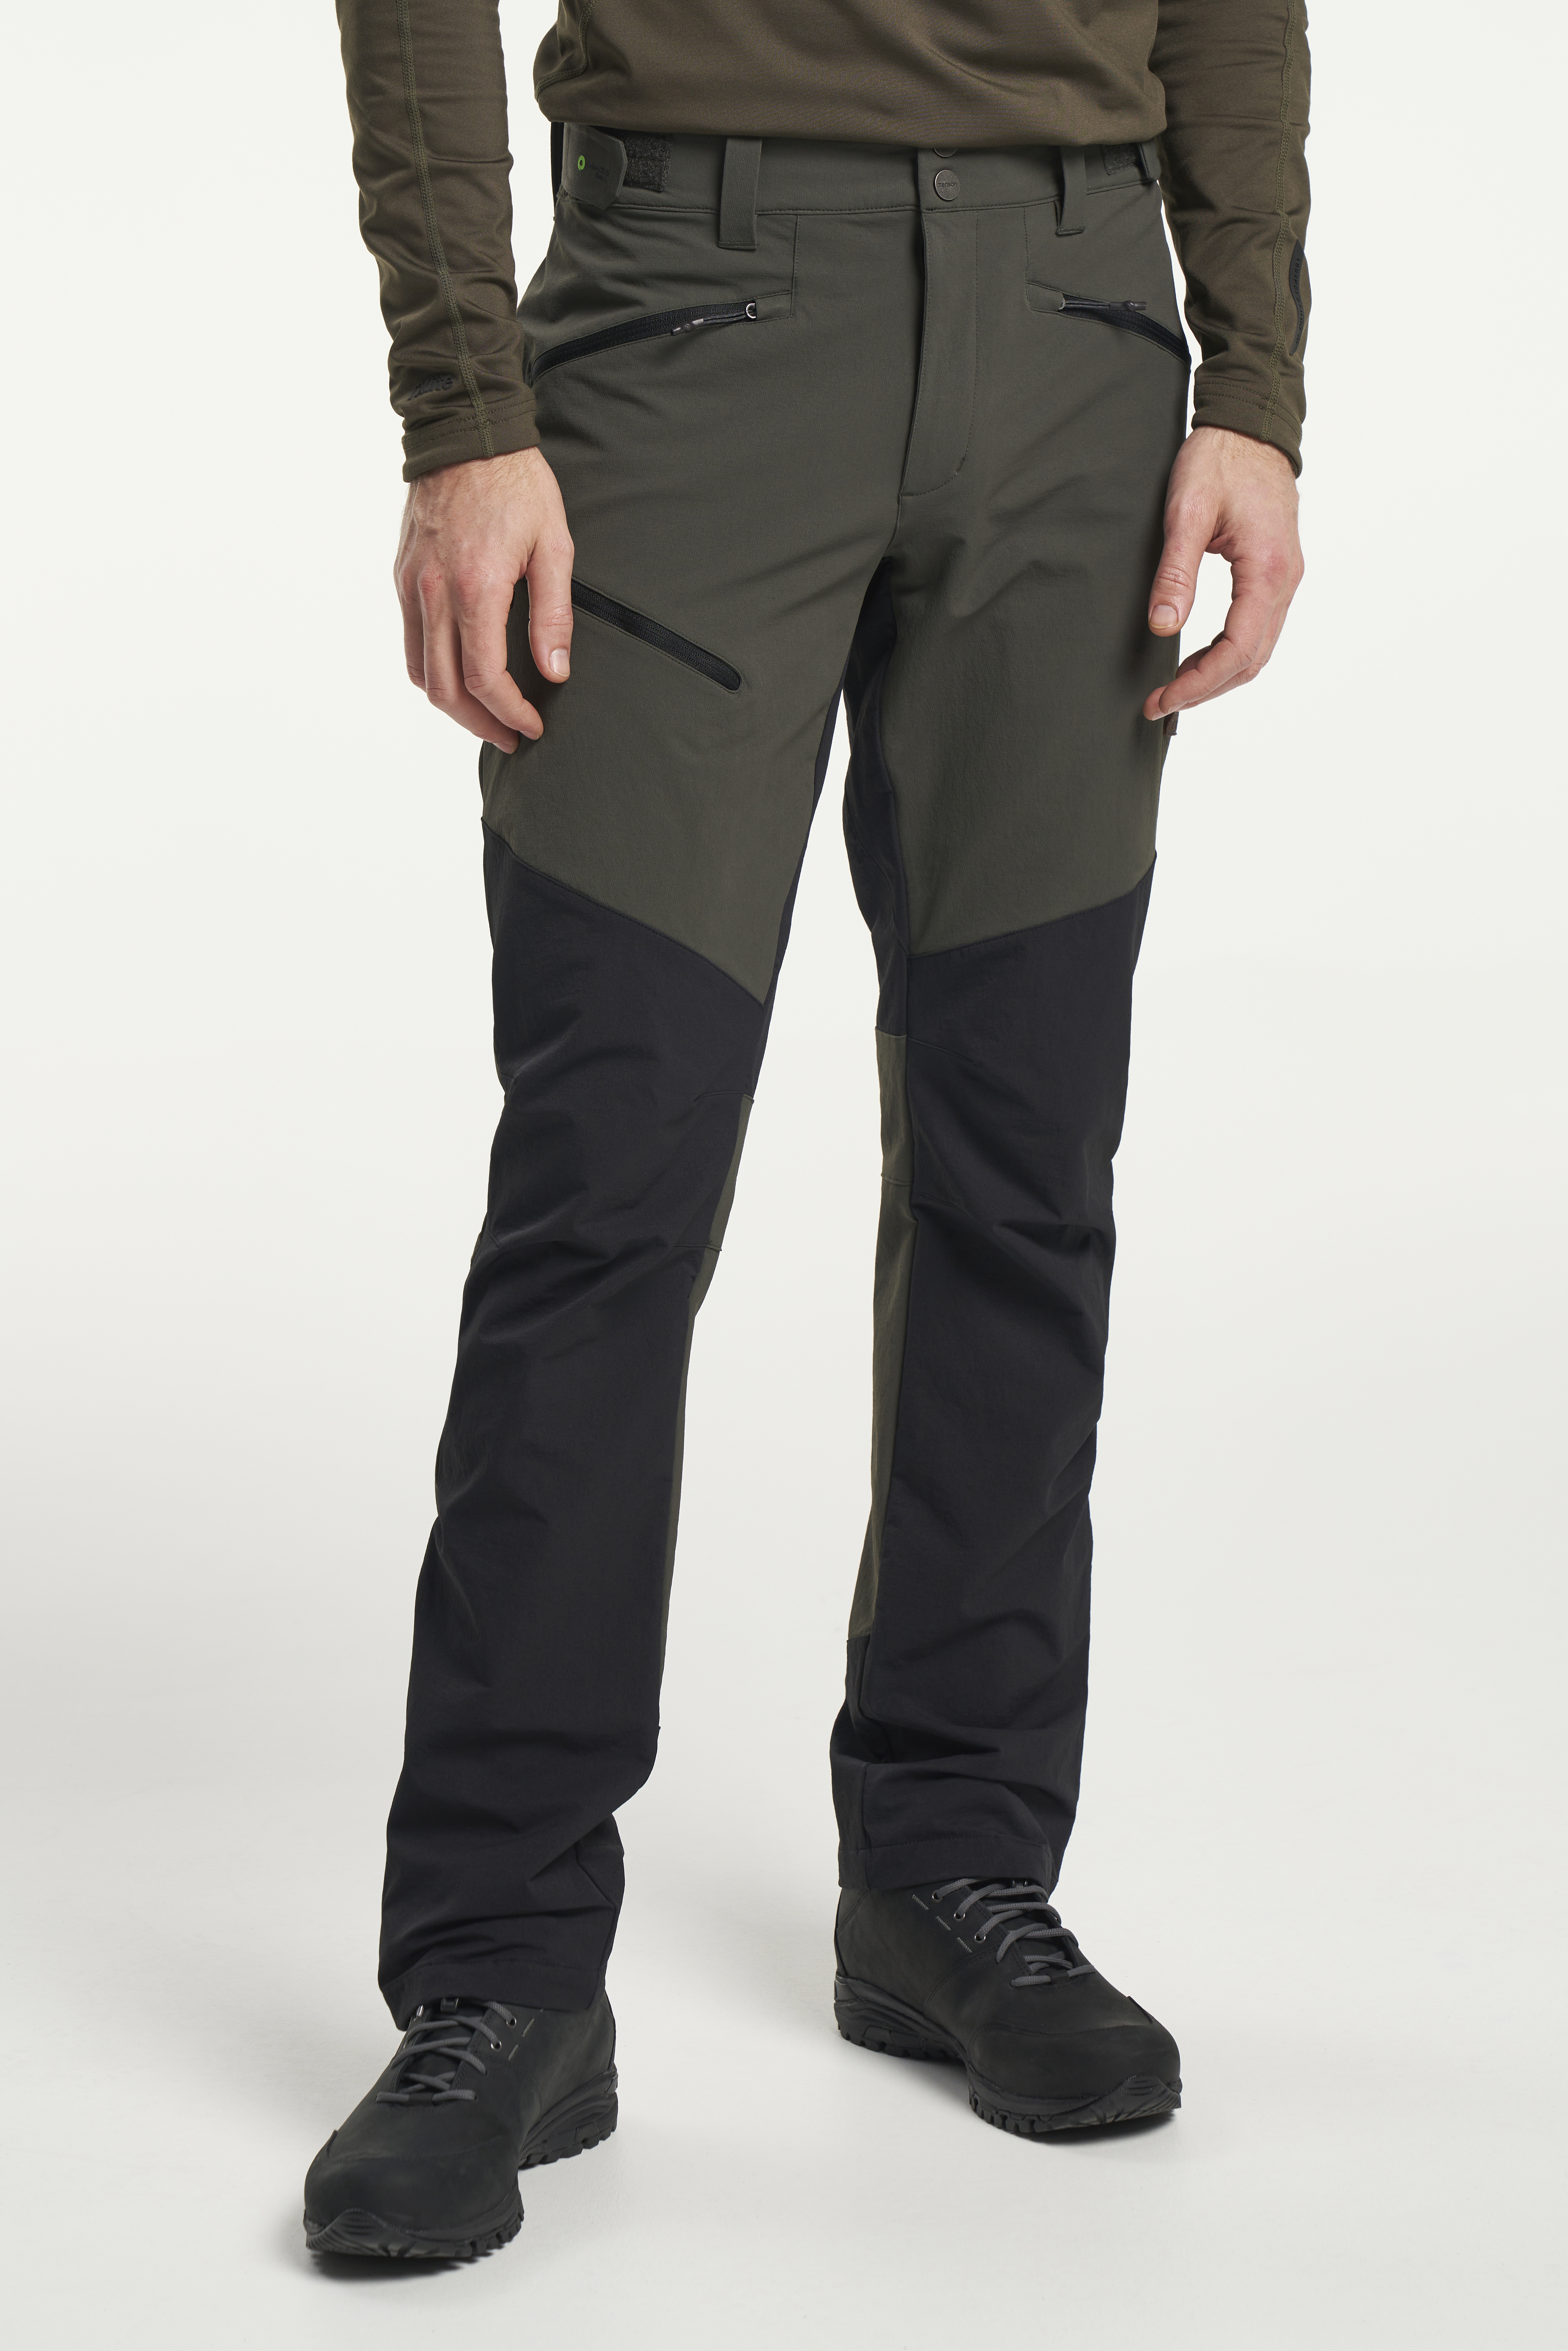 Aggregate more than 83 outdoor trousers best